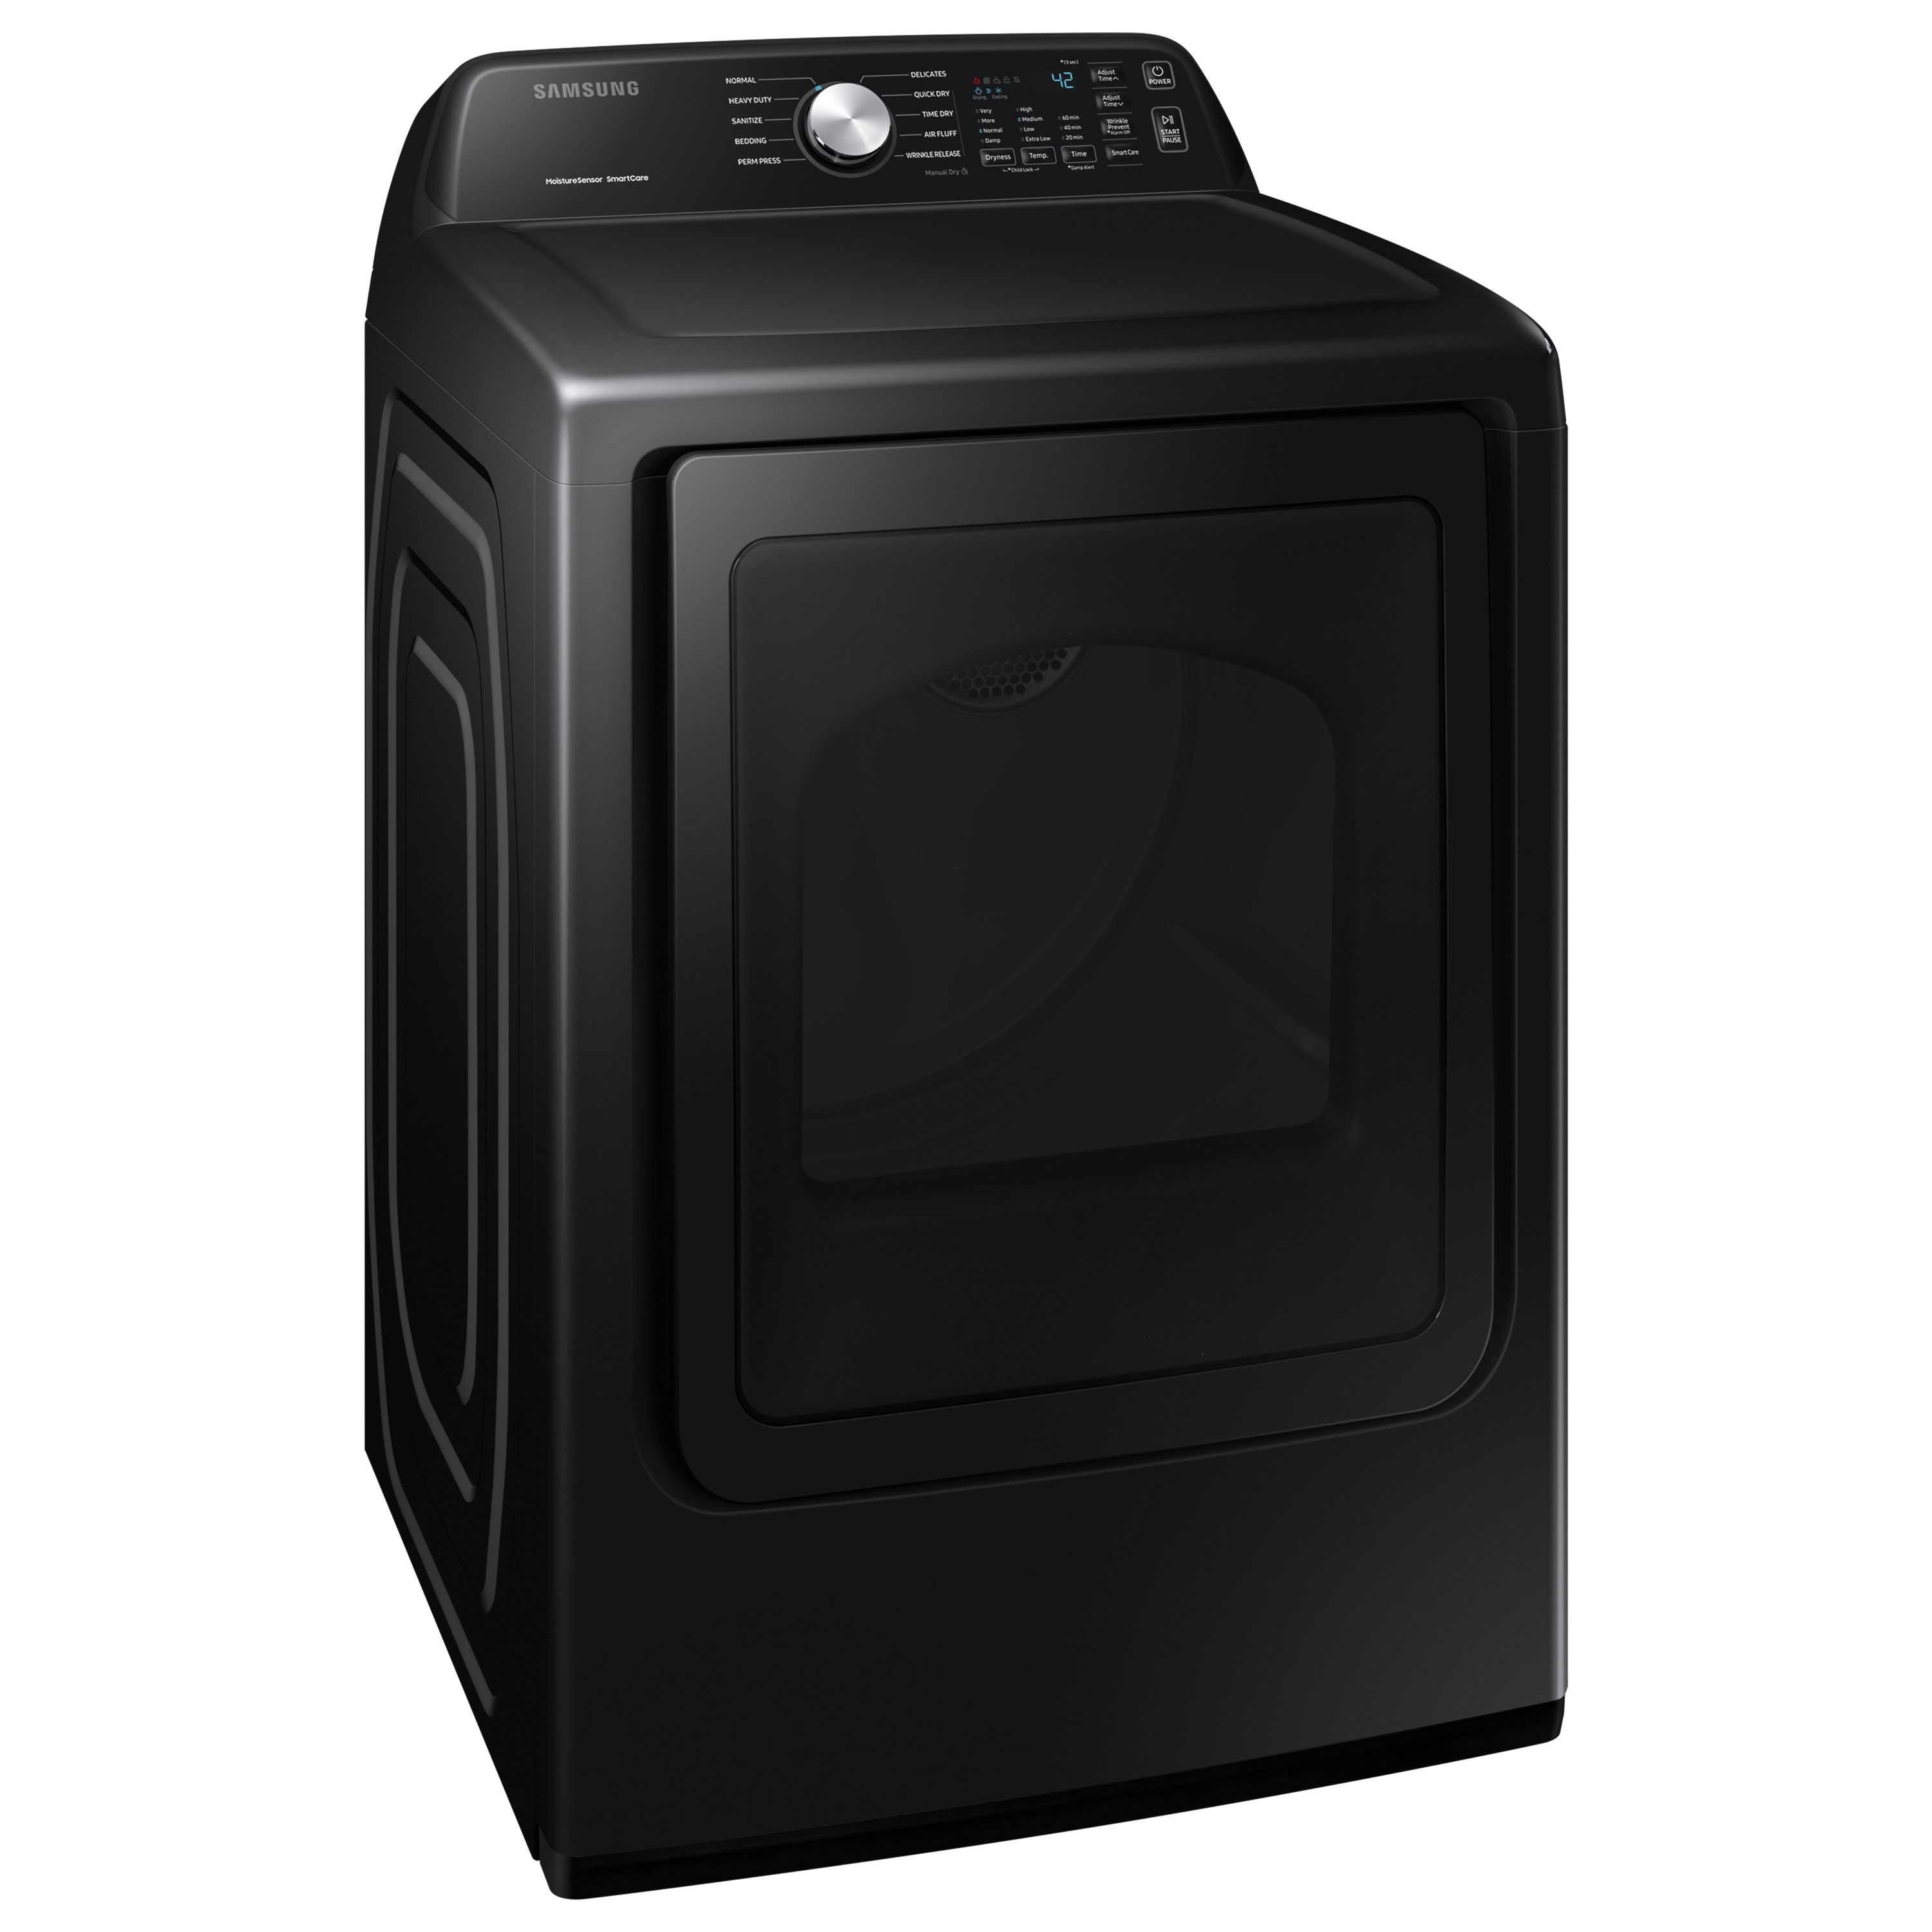 Black stainless steel Dryers at Lowes.com